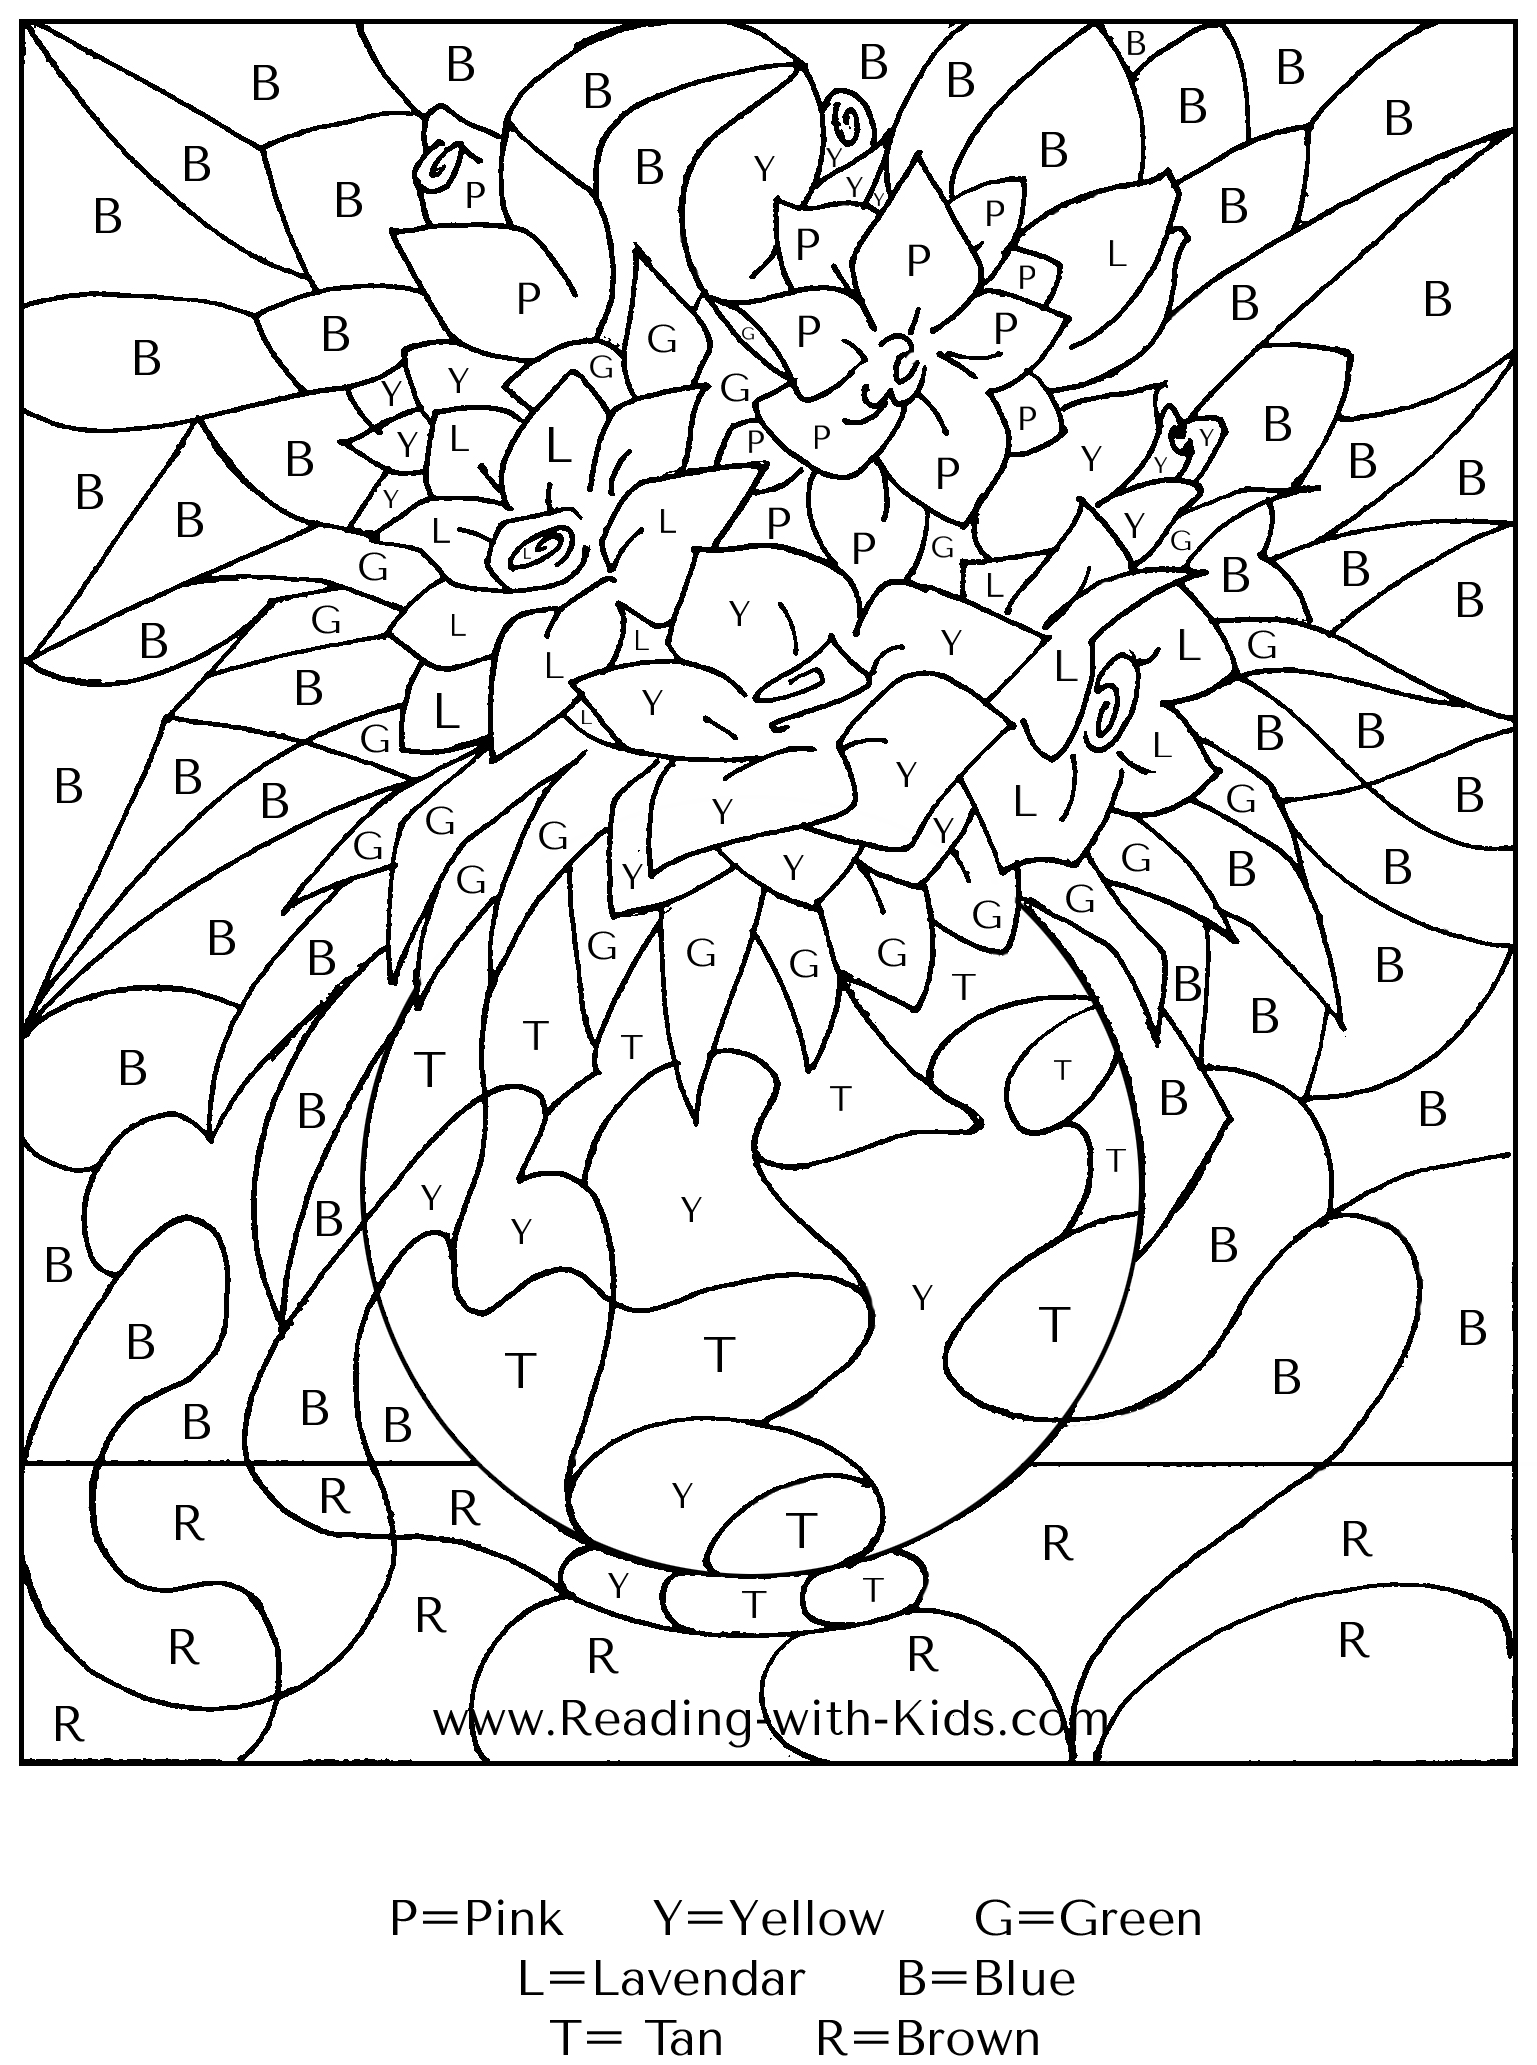 Printable Color By Number Coloring Pages For Adults at GetDrawings